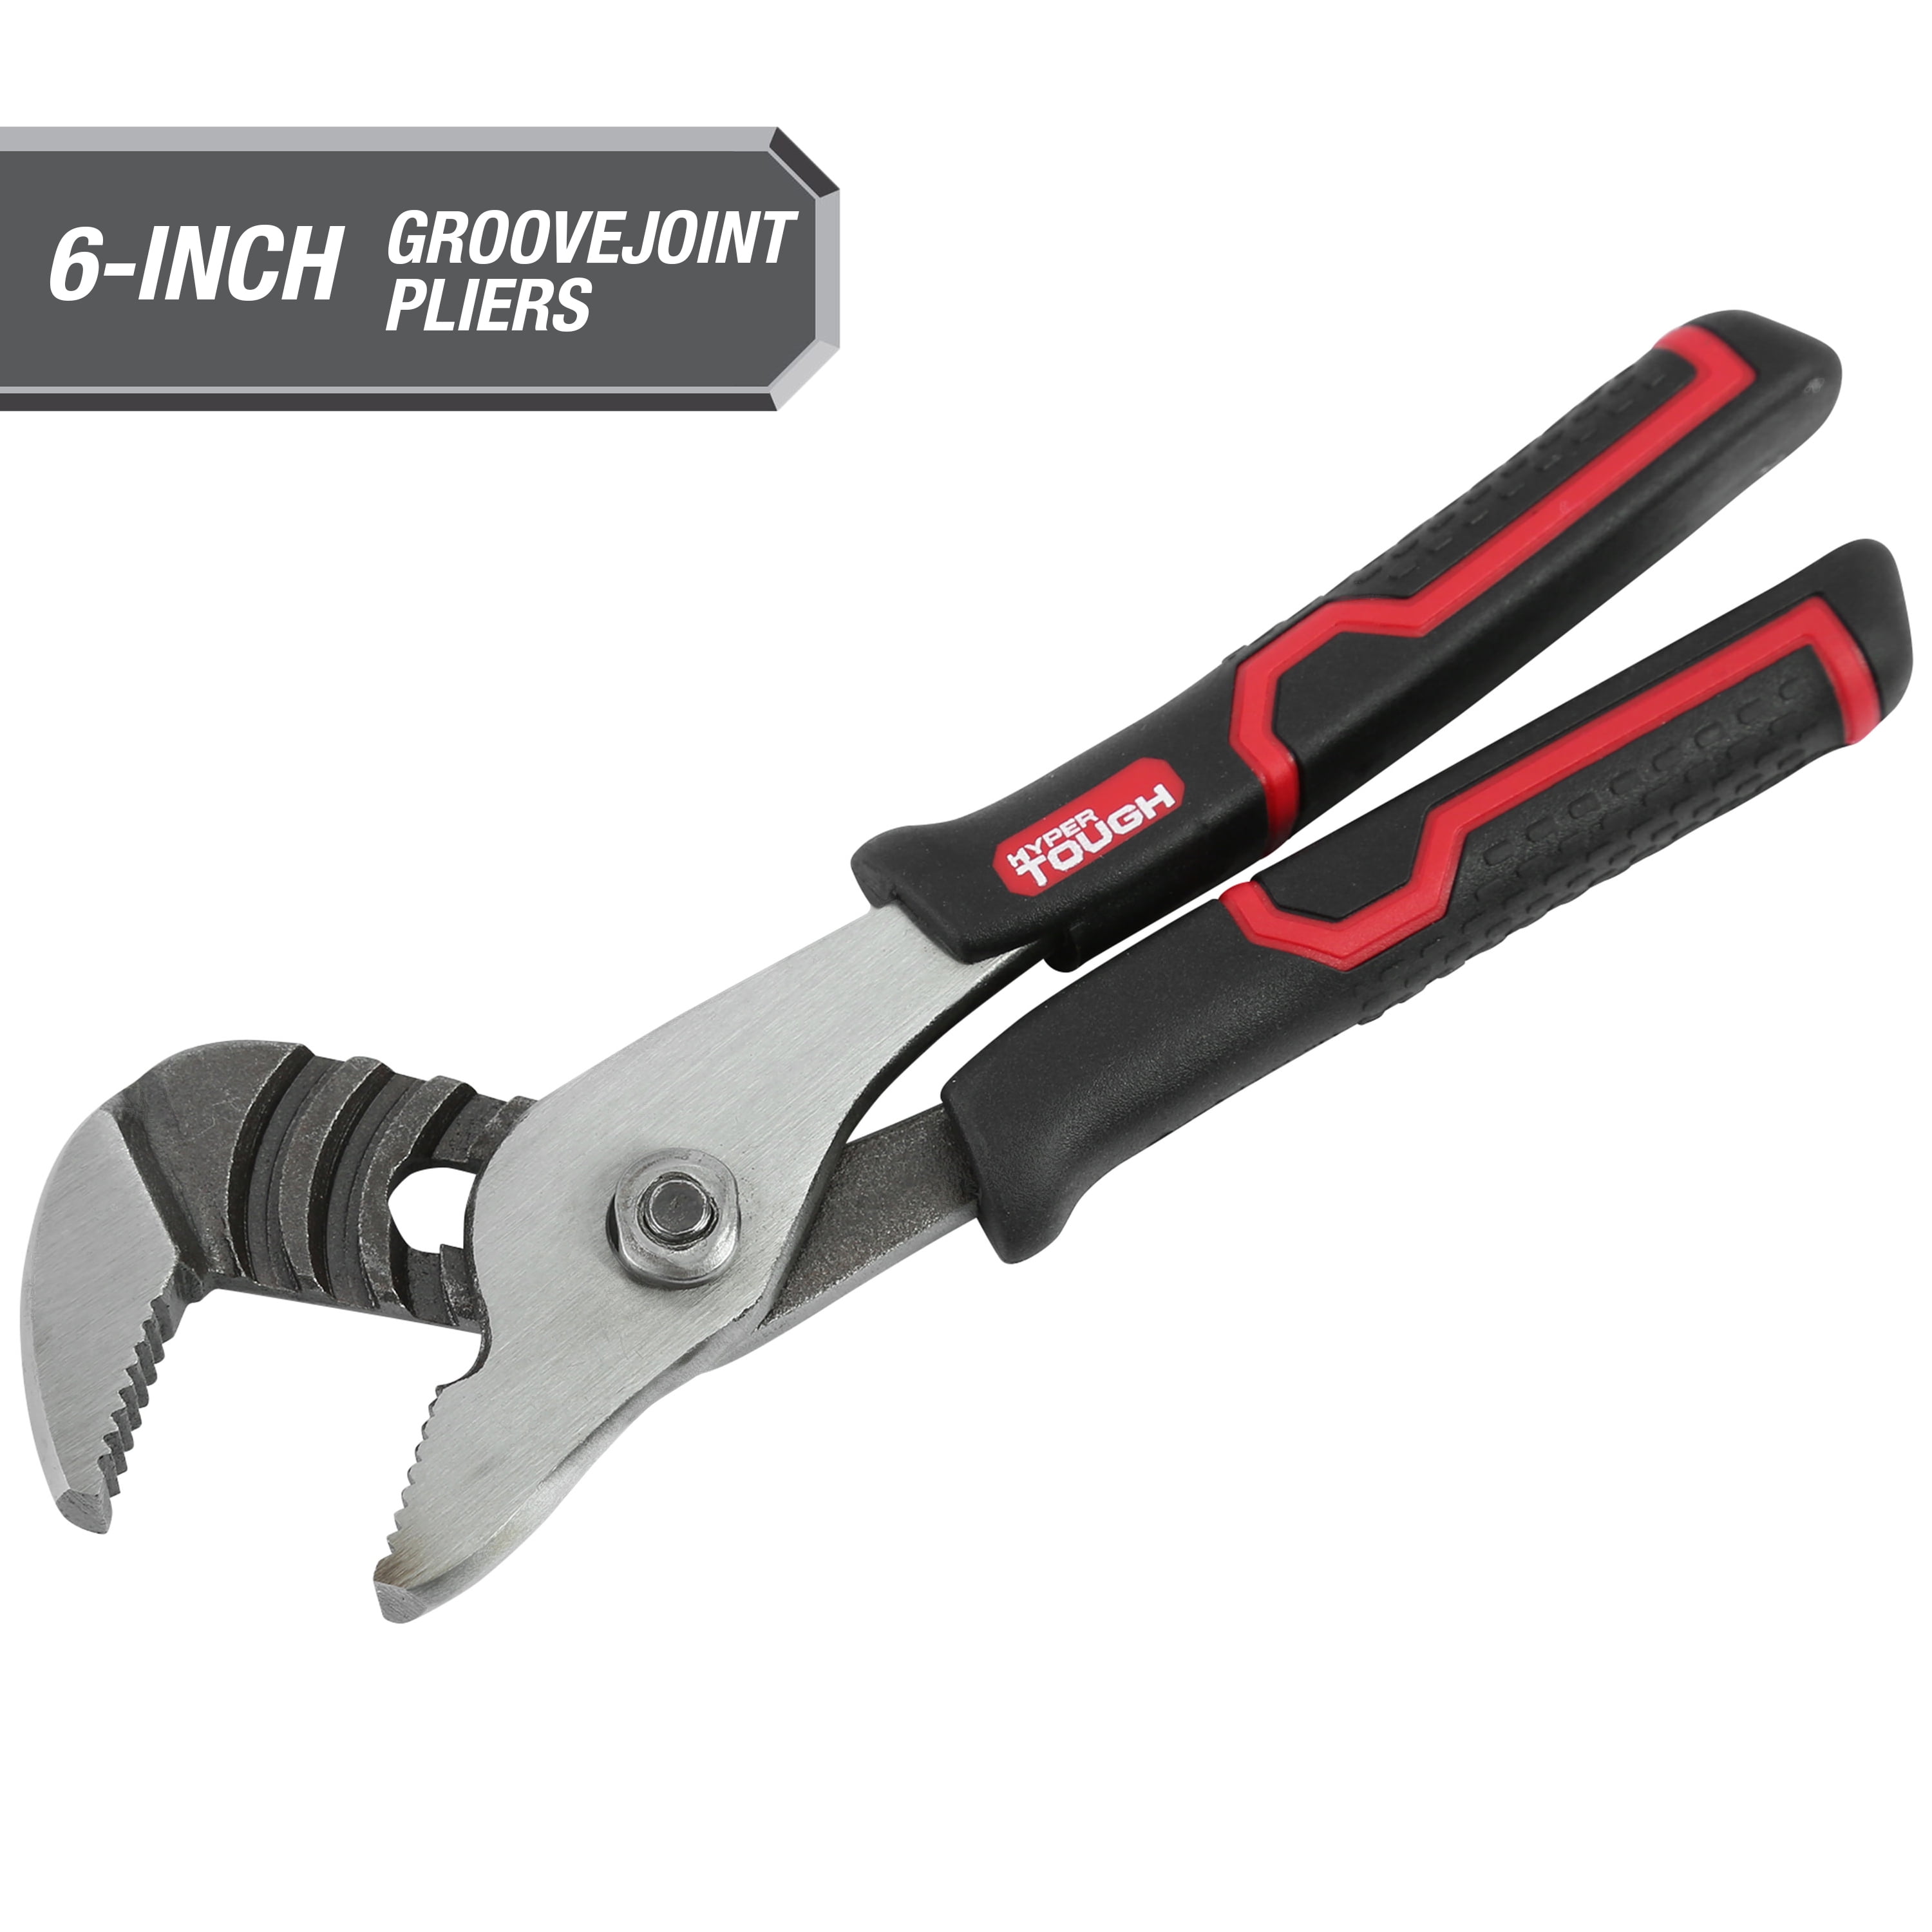 Hyper Tough 6-inch Groove Joint Pliers with Ergonomic Comfort Grips, Black